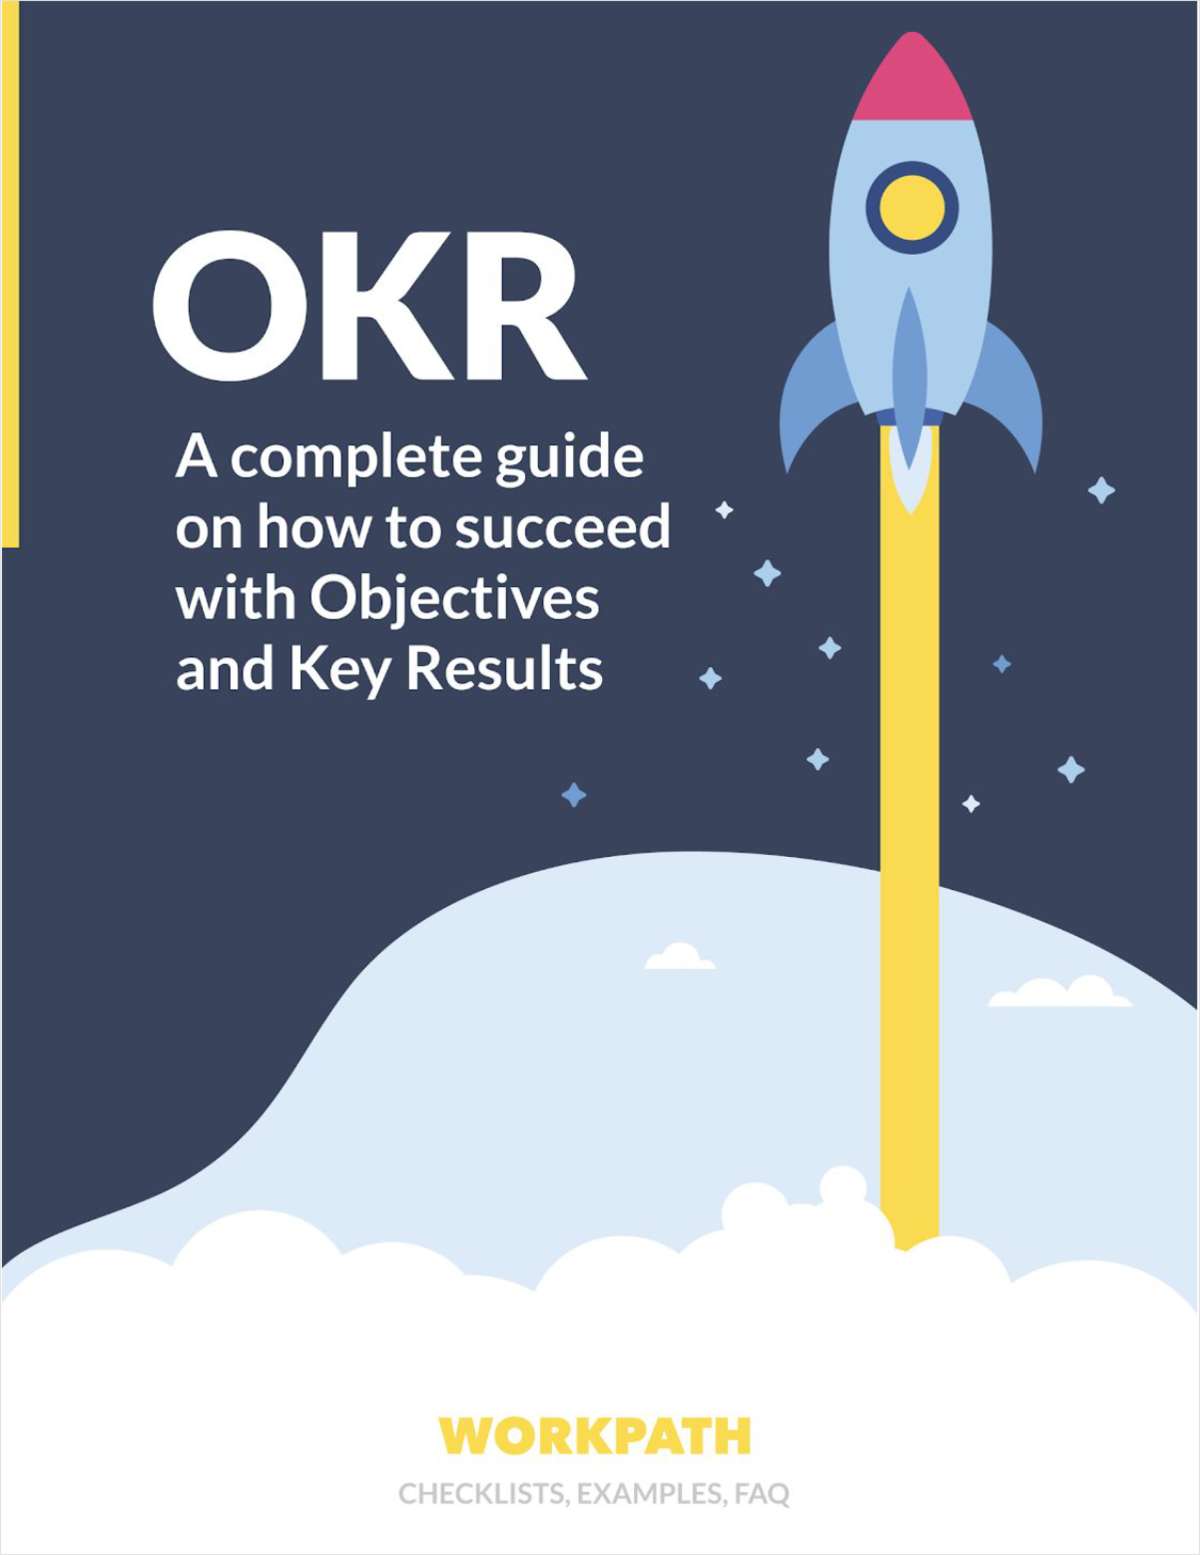 OKR - A Complete Guide on How To Succeed With Objectives and Key Results